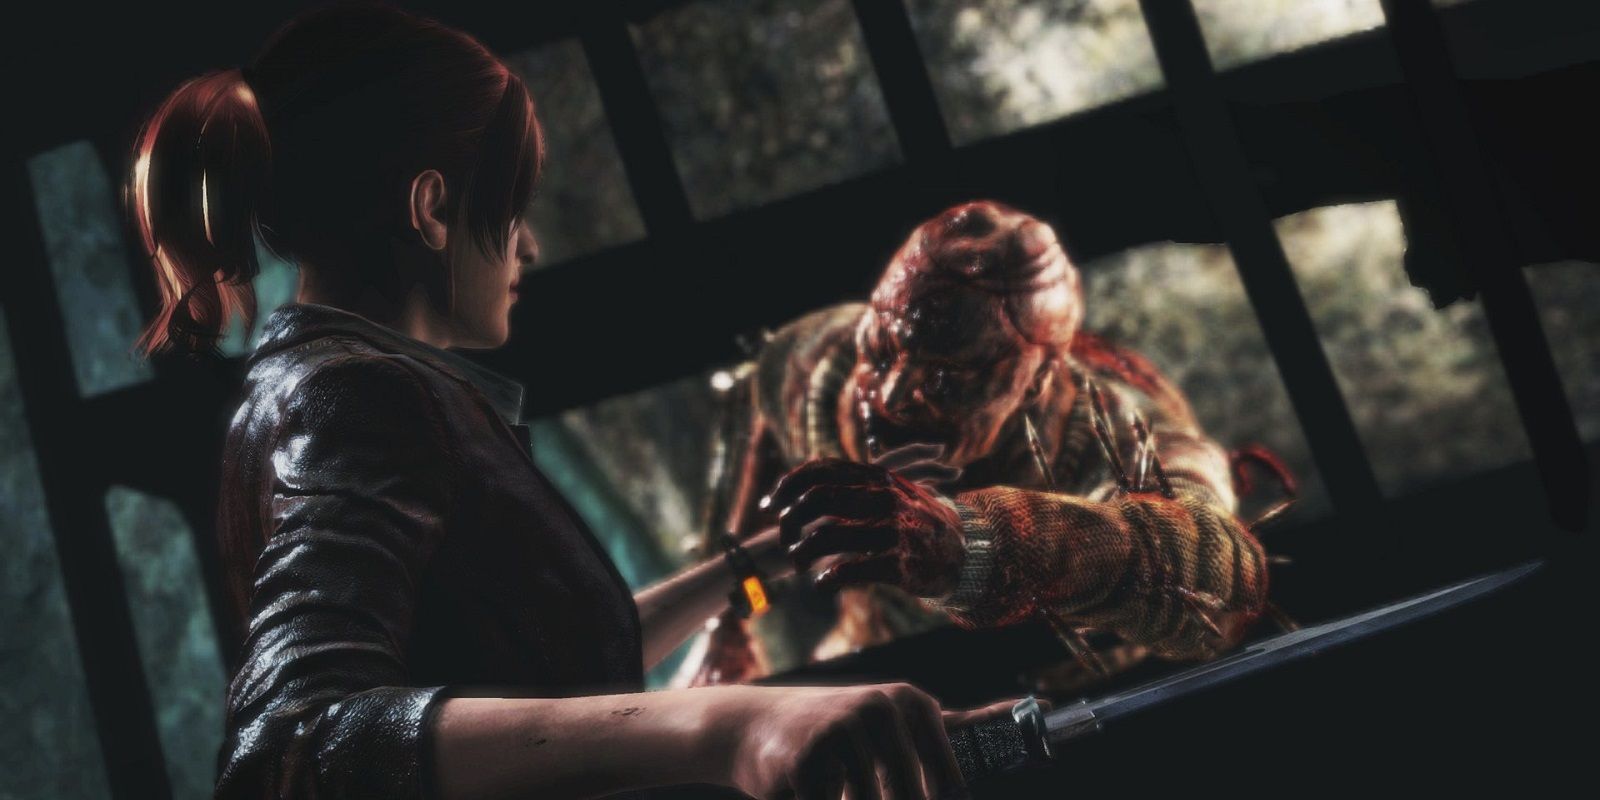 Claire Redfield encountering a zombie in Resident Evil Revelations 2 (2015)